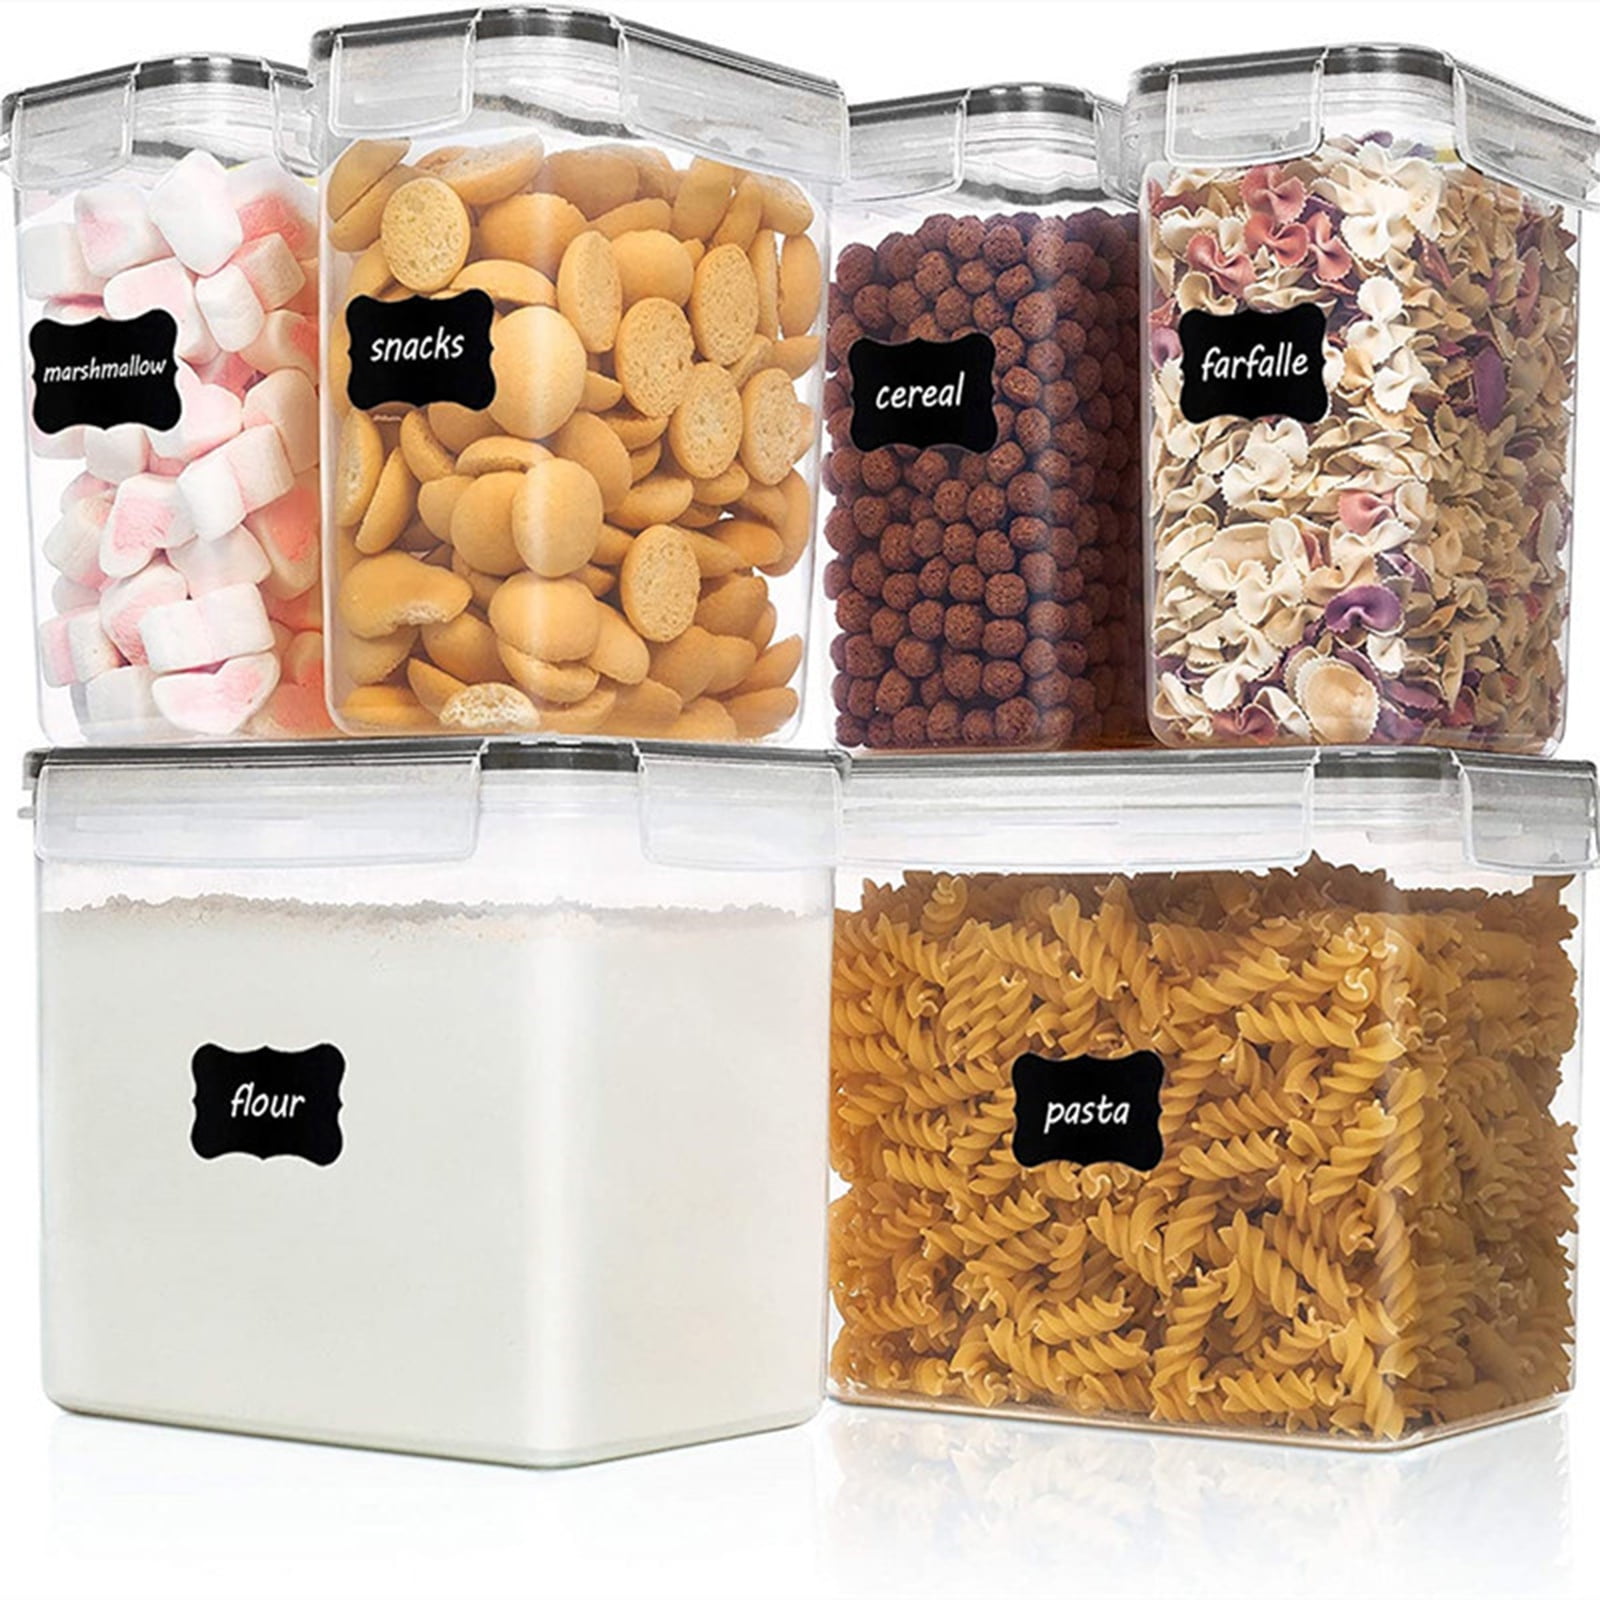 1pc Airtight Food Storage Containers Set, Plastic Kitchen Storage Canisters  For Flour, Sugar, Cereal, With Lables, Dishwasher Safe